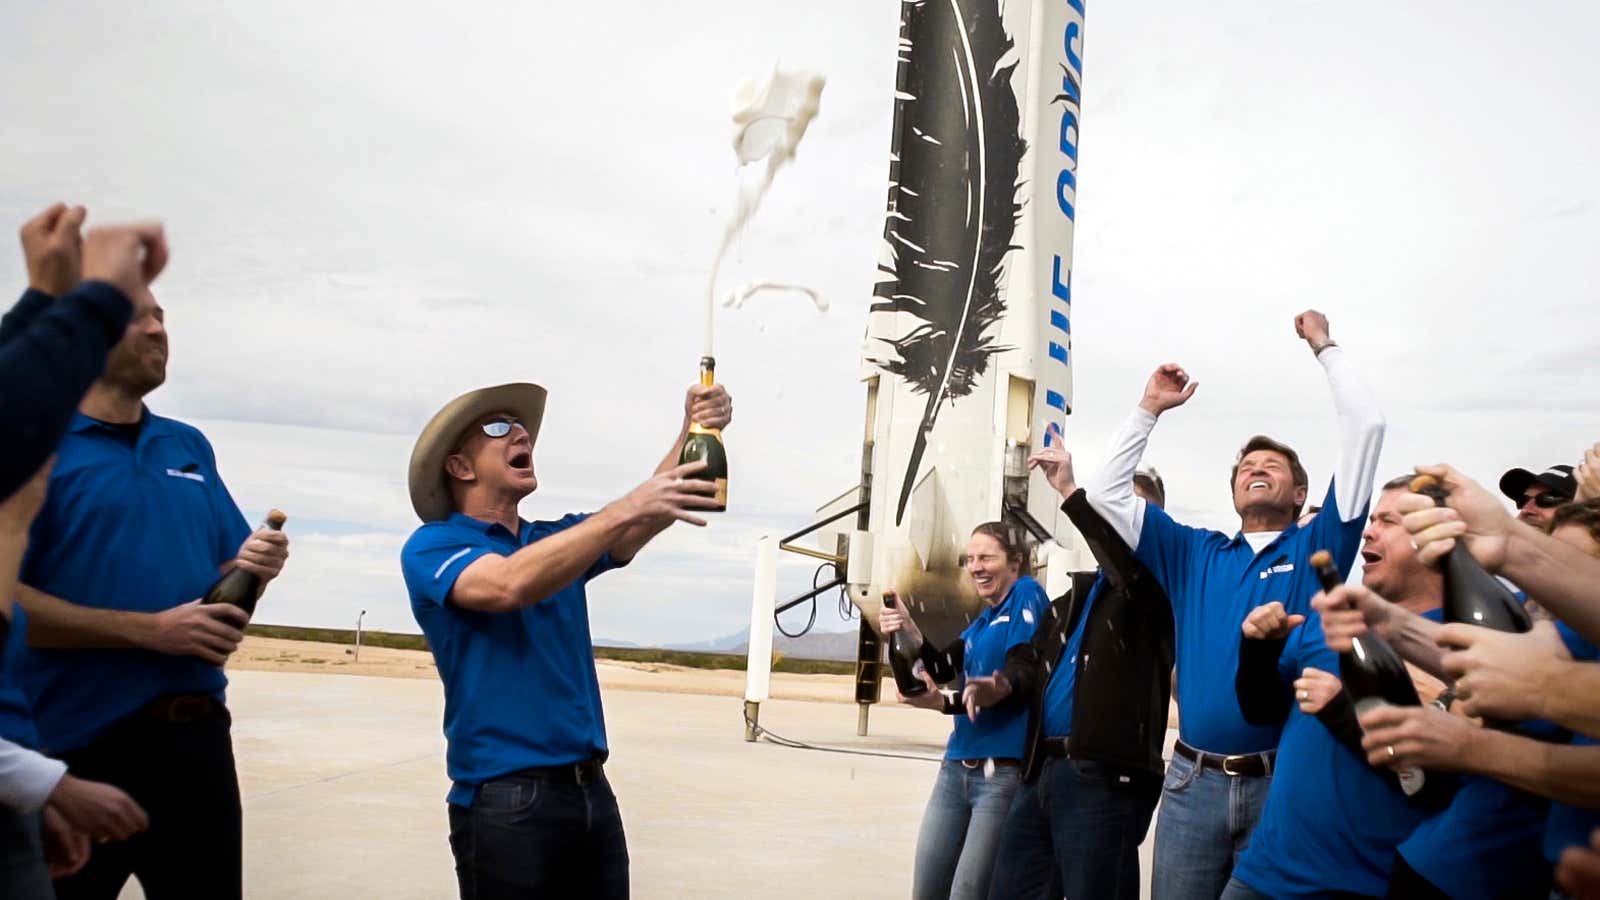 Bezos and his team celebrate the first successful landing of the New Shepard rocket booster.